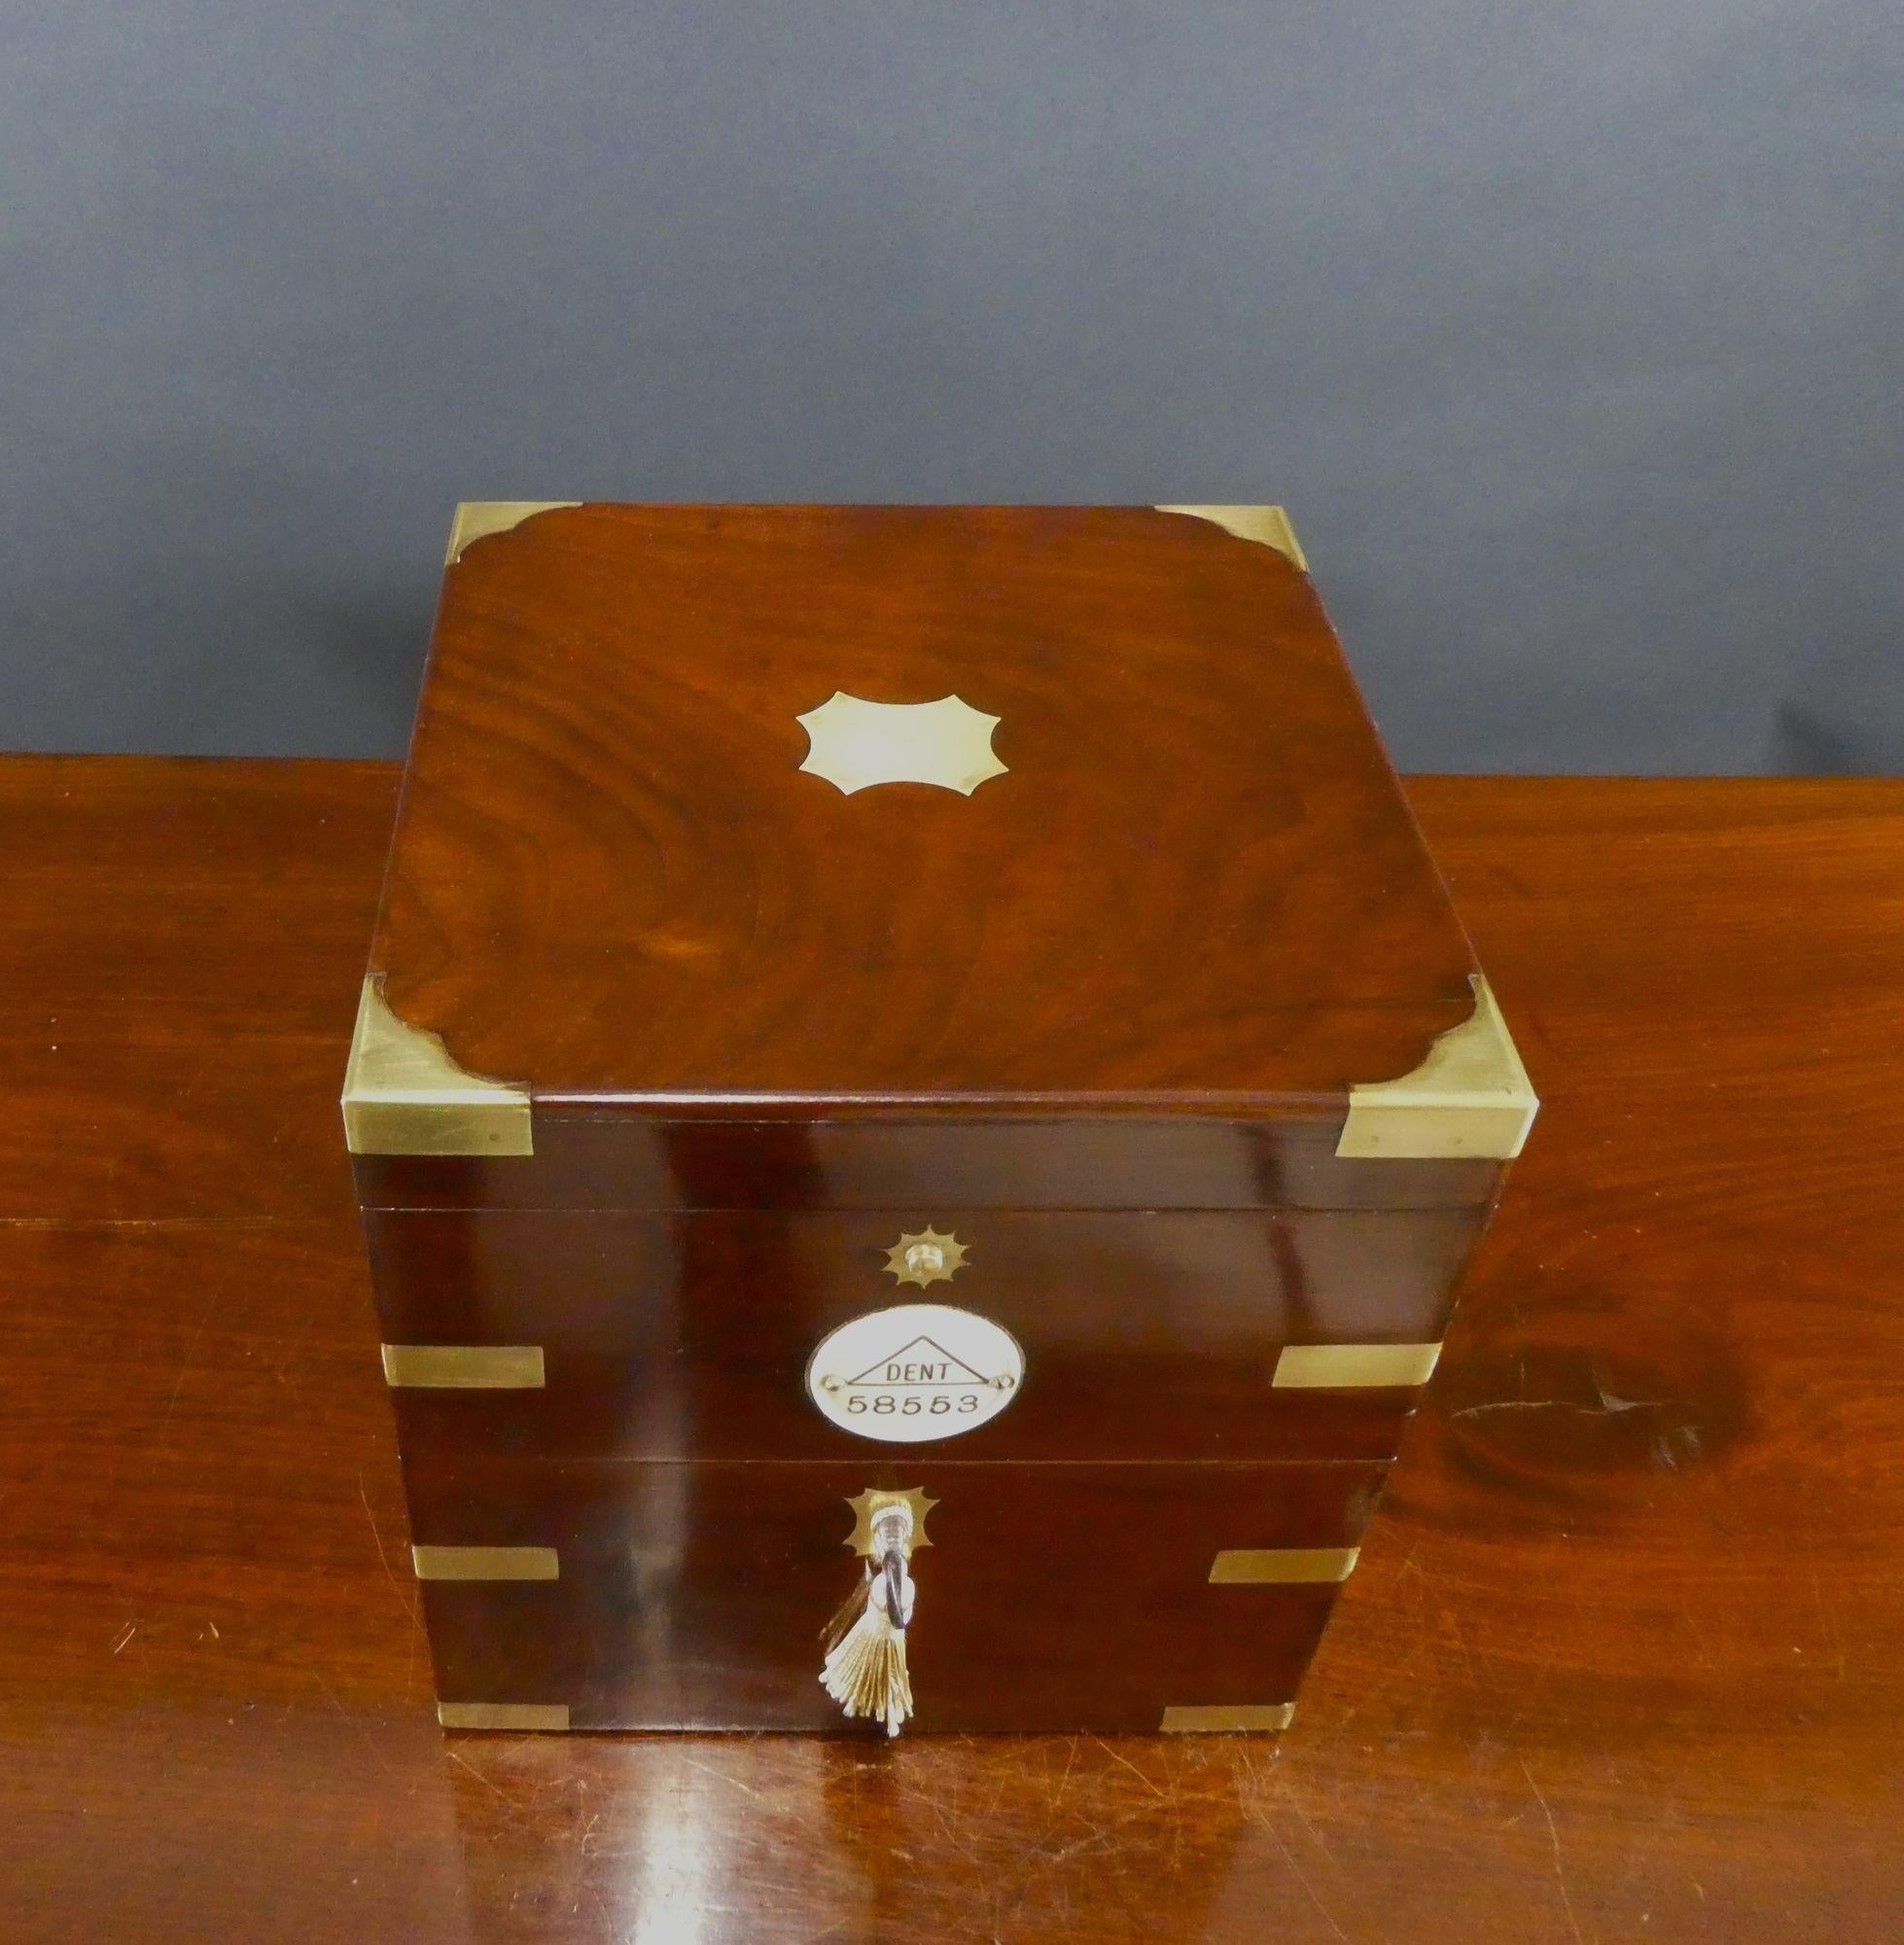 Fine Two Day Marine Chronometer by Dent, London. No58553 For Sale 2